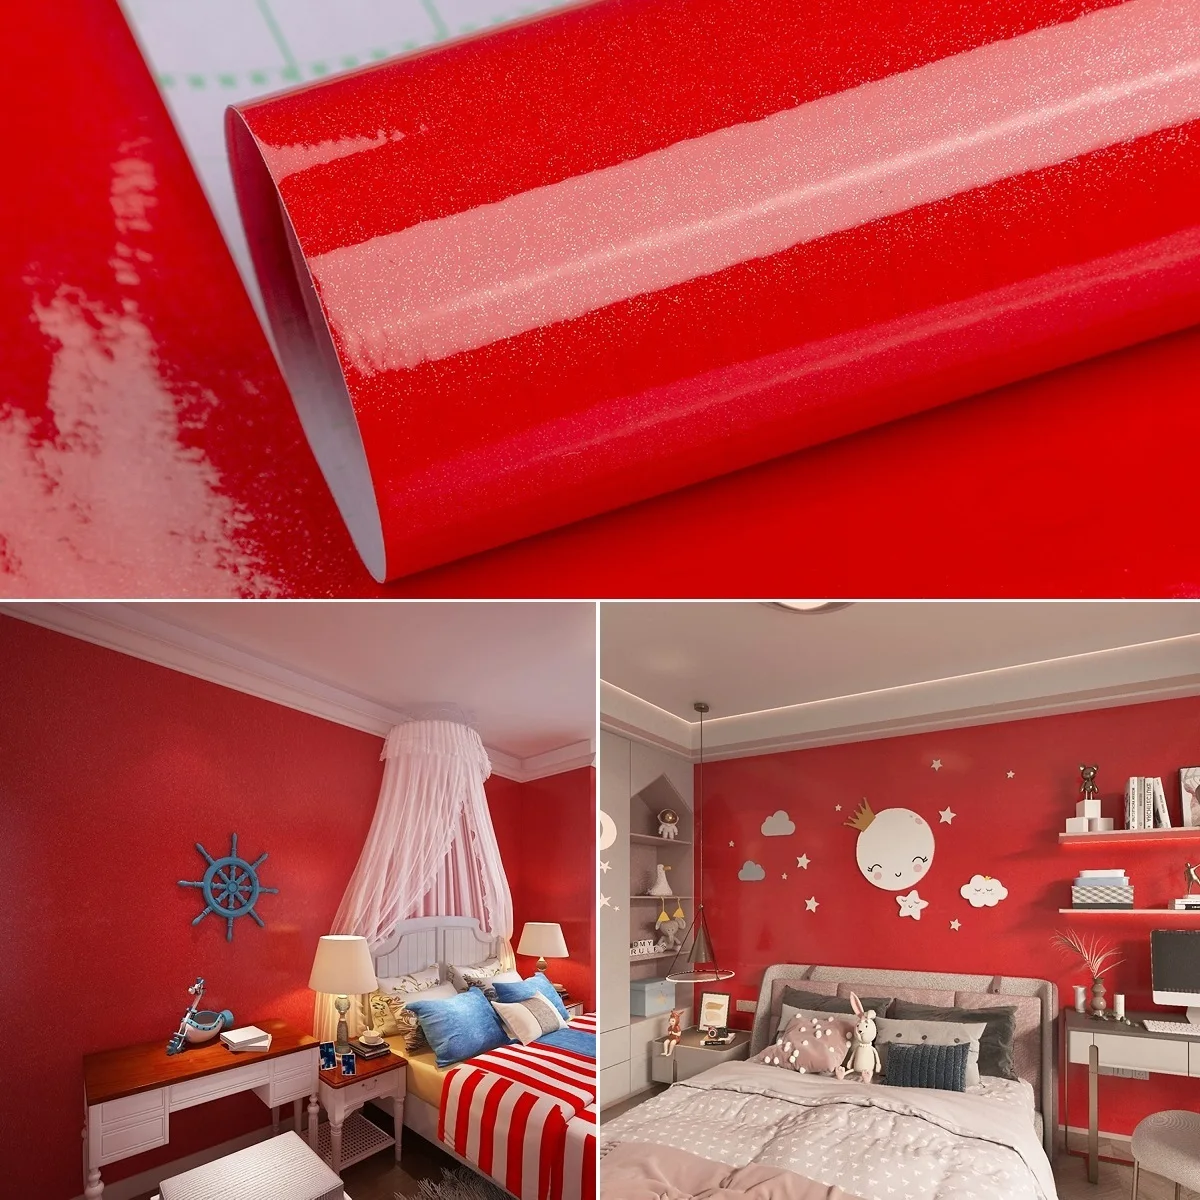 

TOTIO Thick Solid Color Red Wall Paper Self Adhesive Vinyl Wallpaper Peel and Stick Interior Stickers Room Decorations For Girls